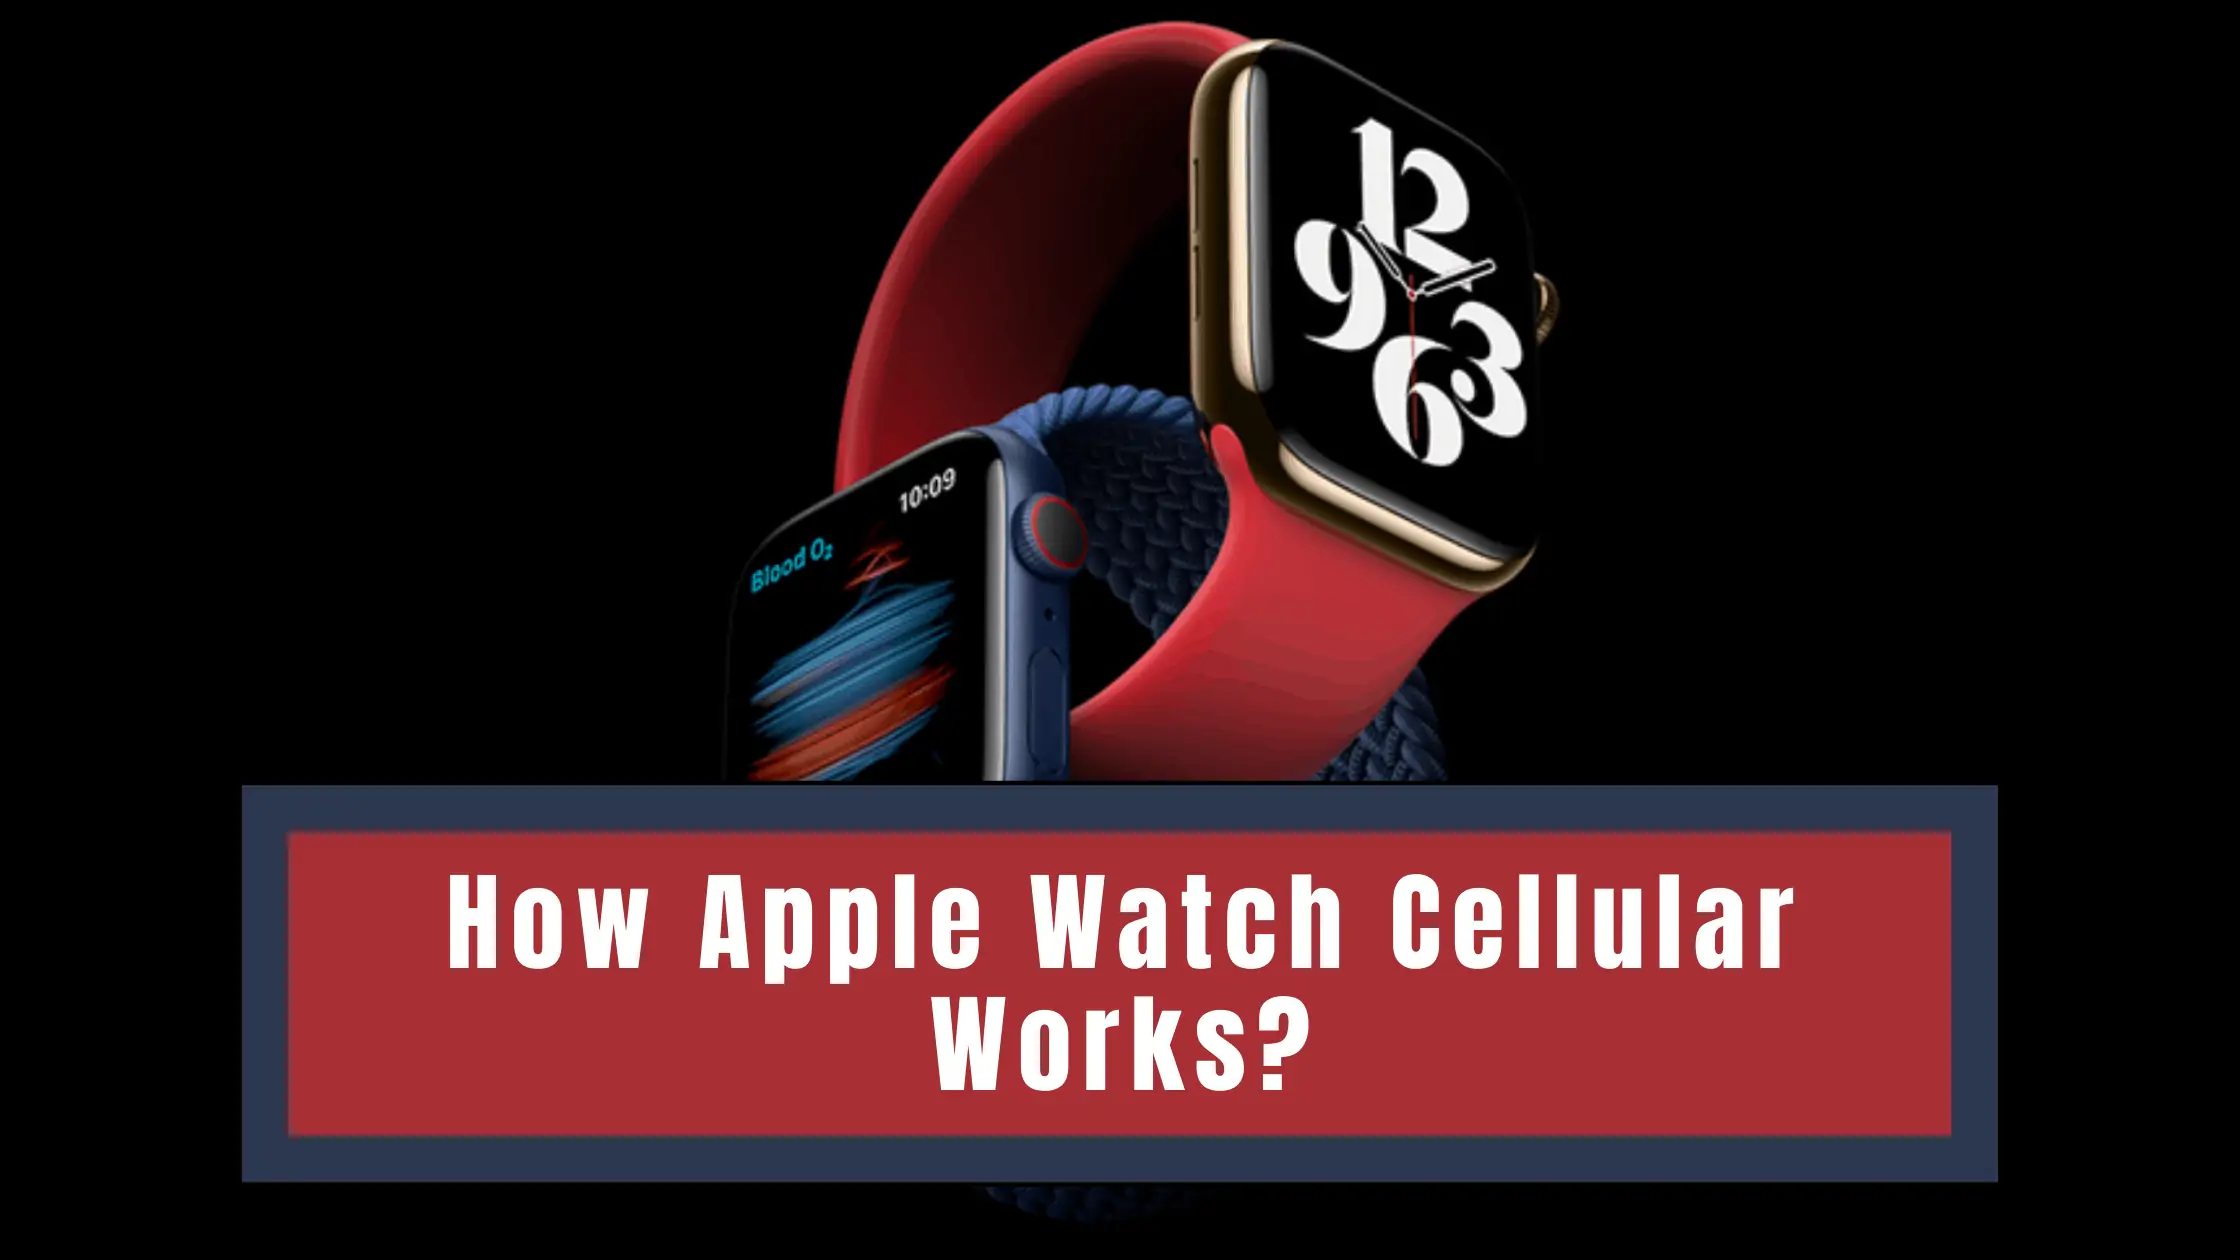 So, find out How Apple Watch Cellular Works!